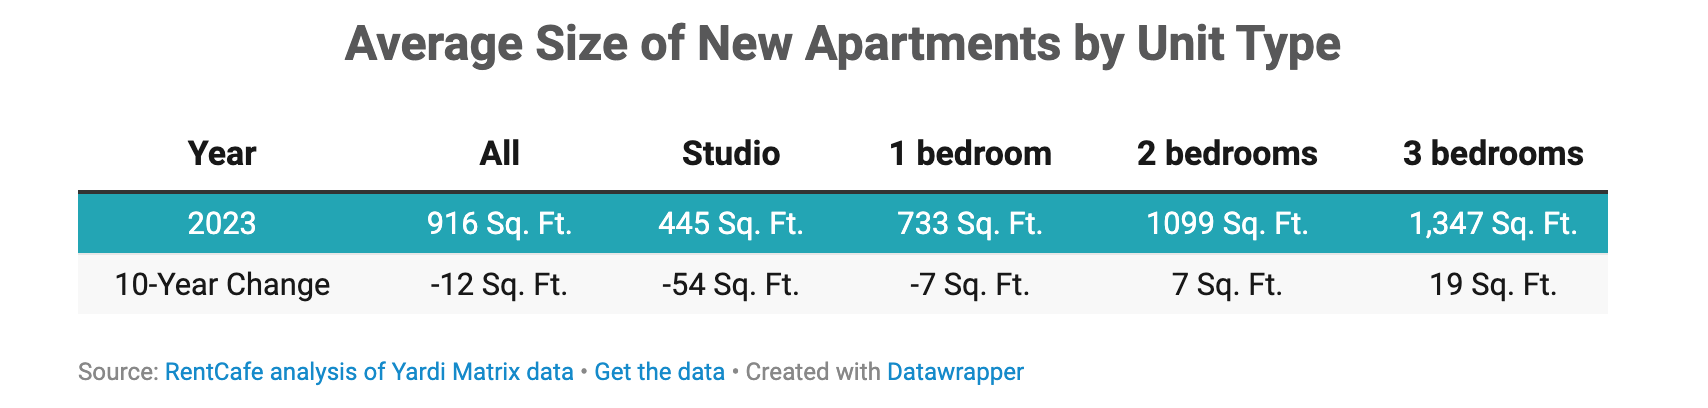 Average size of new apartments by unit type